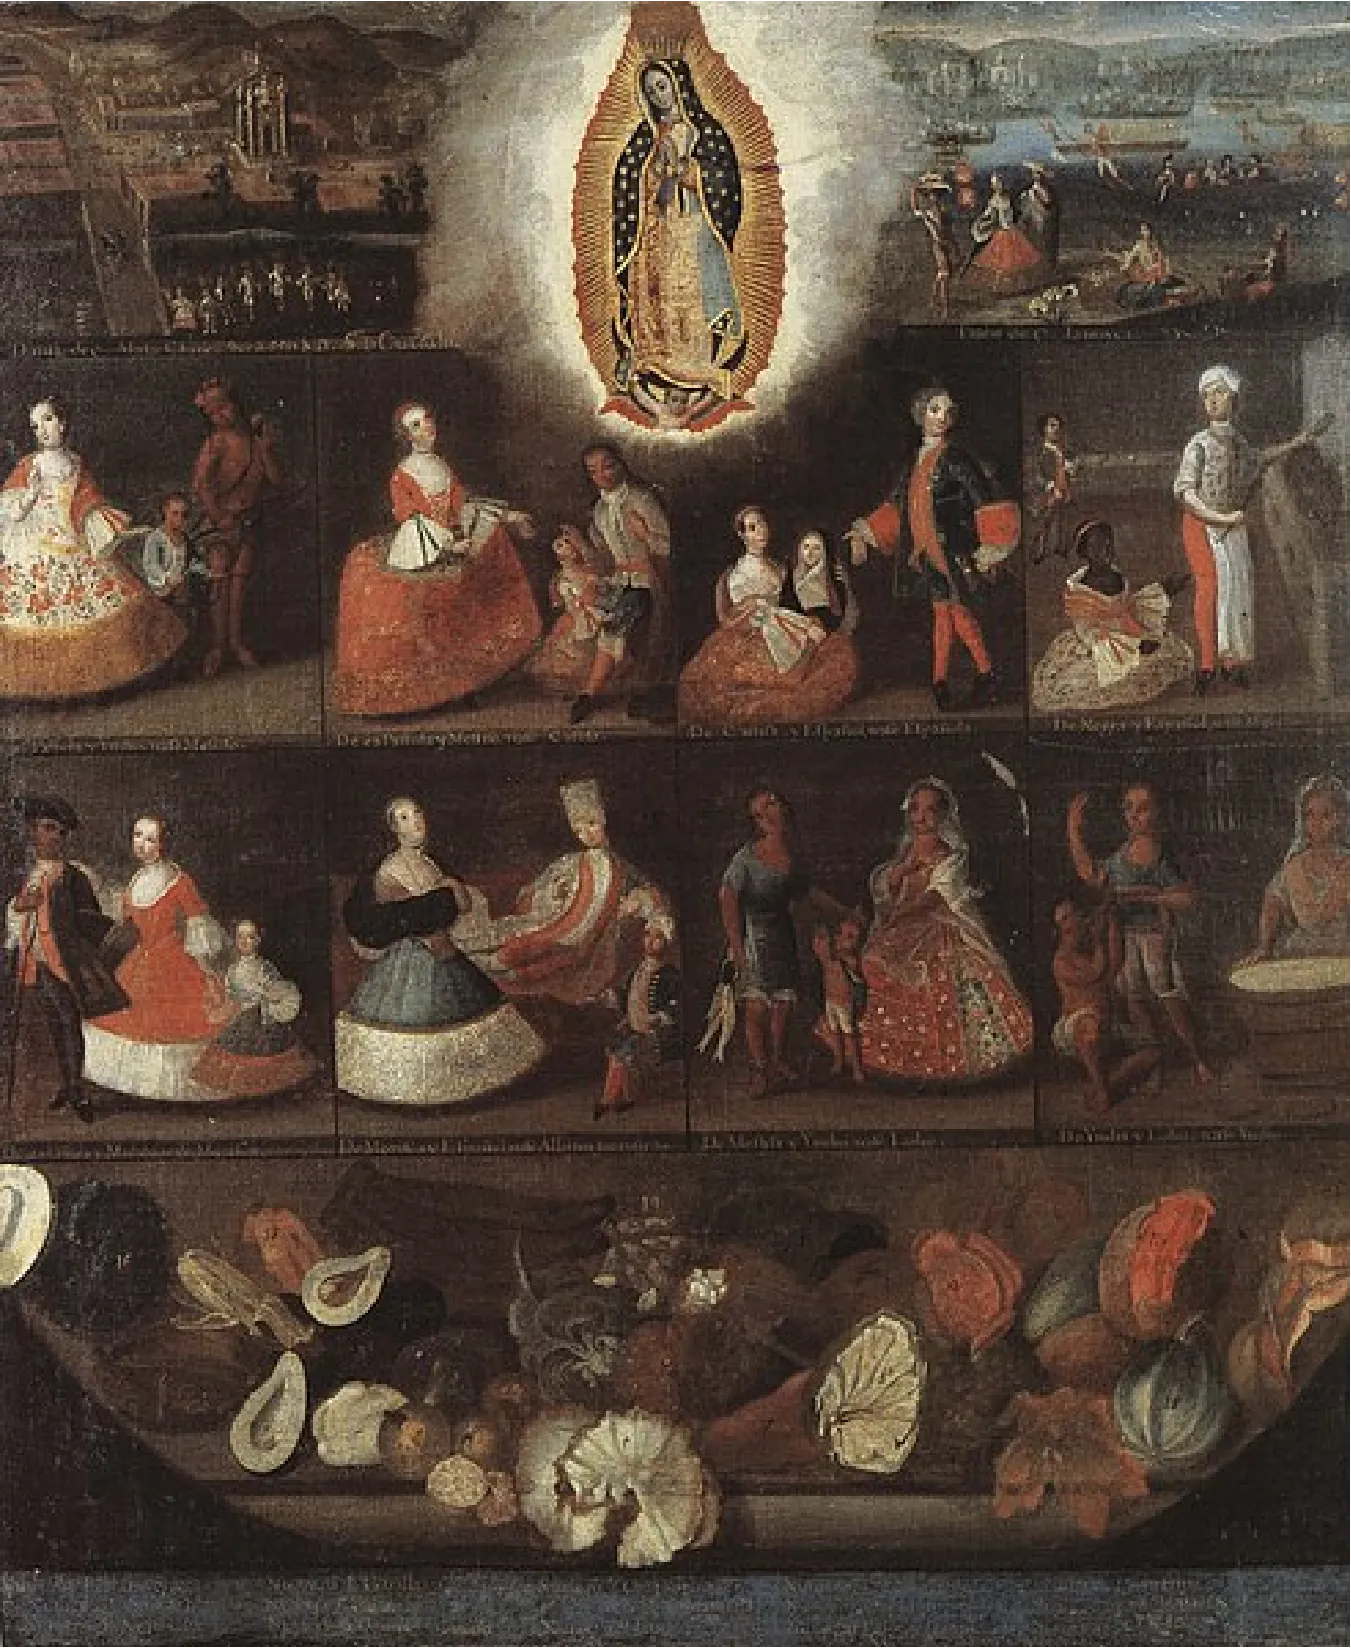 This is a three-part image. The Virgin of Guadalupe is at the top. Below the Virgin are several images of mixed-race groups. The bottom of the image shows fruits and vegetables.